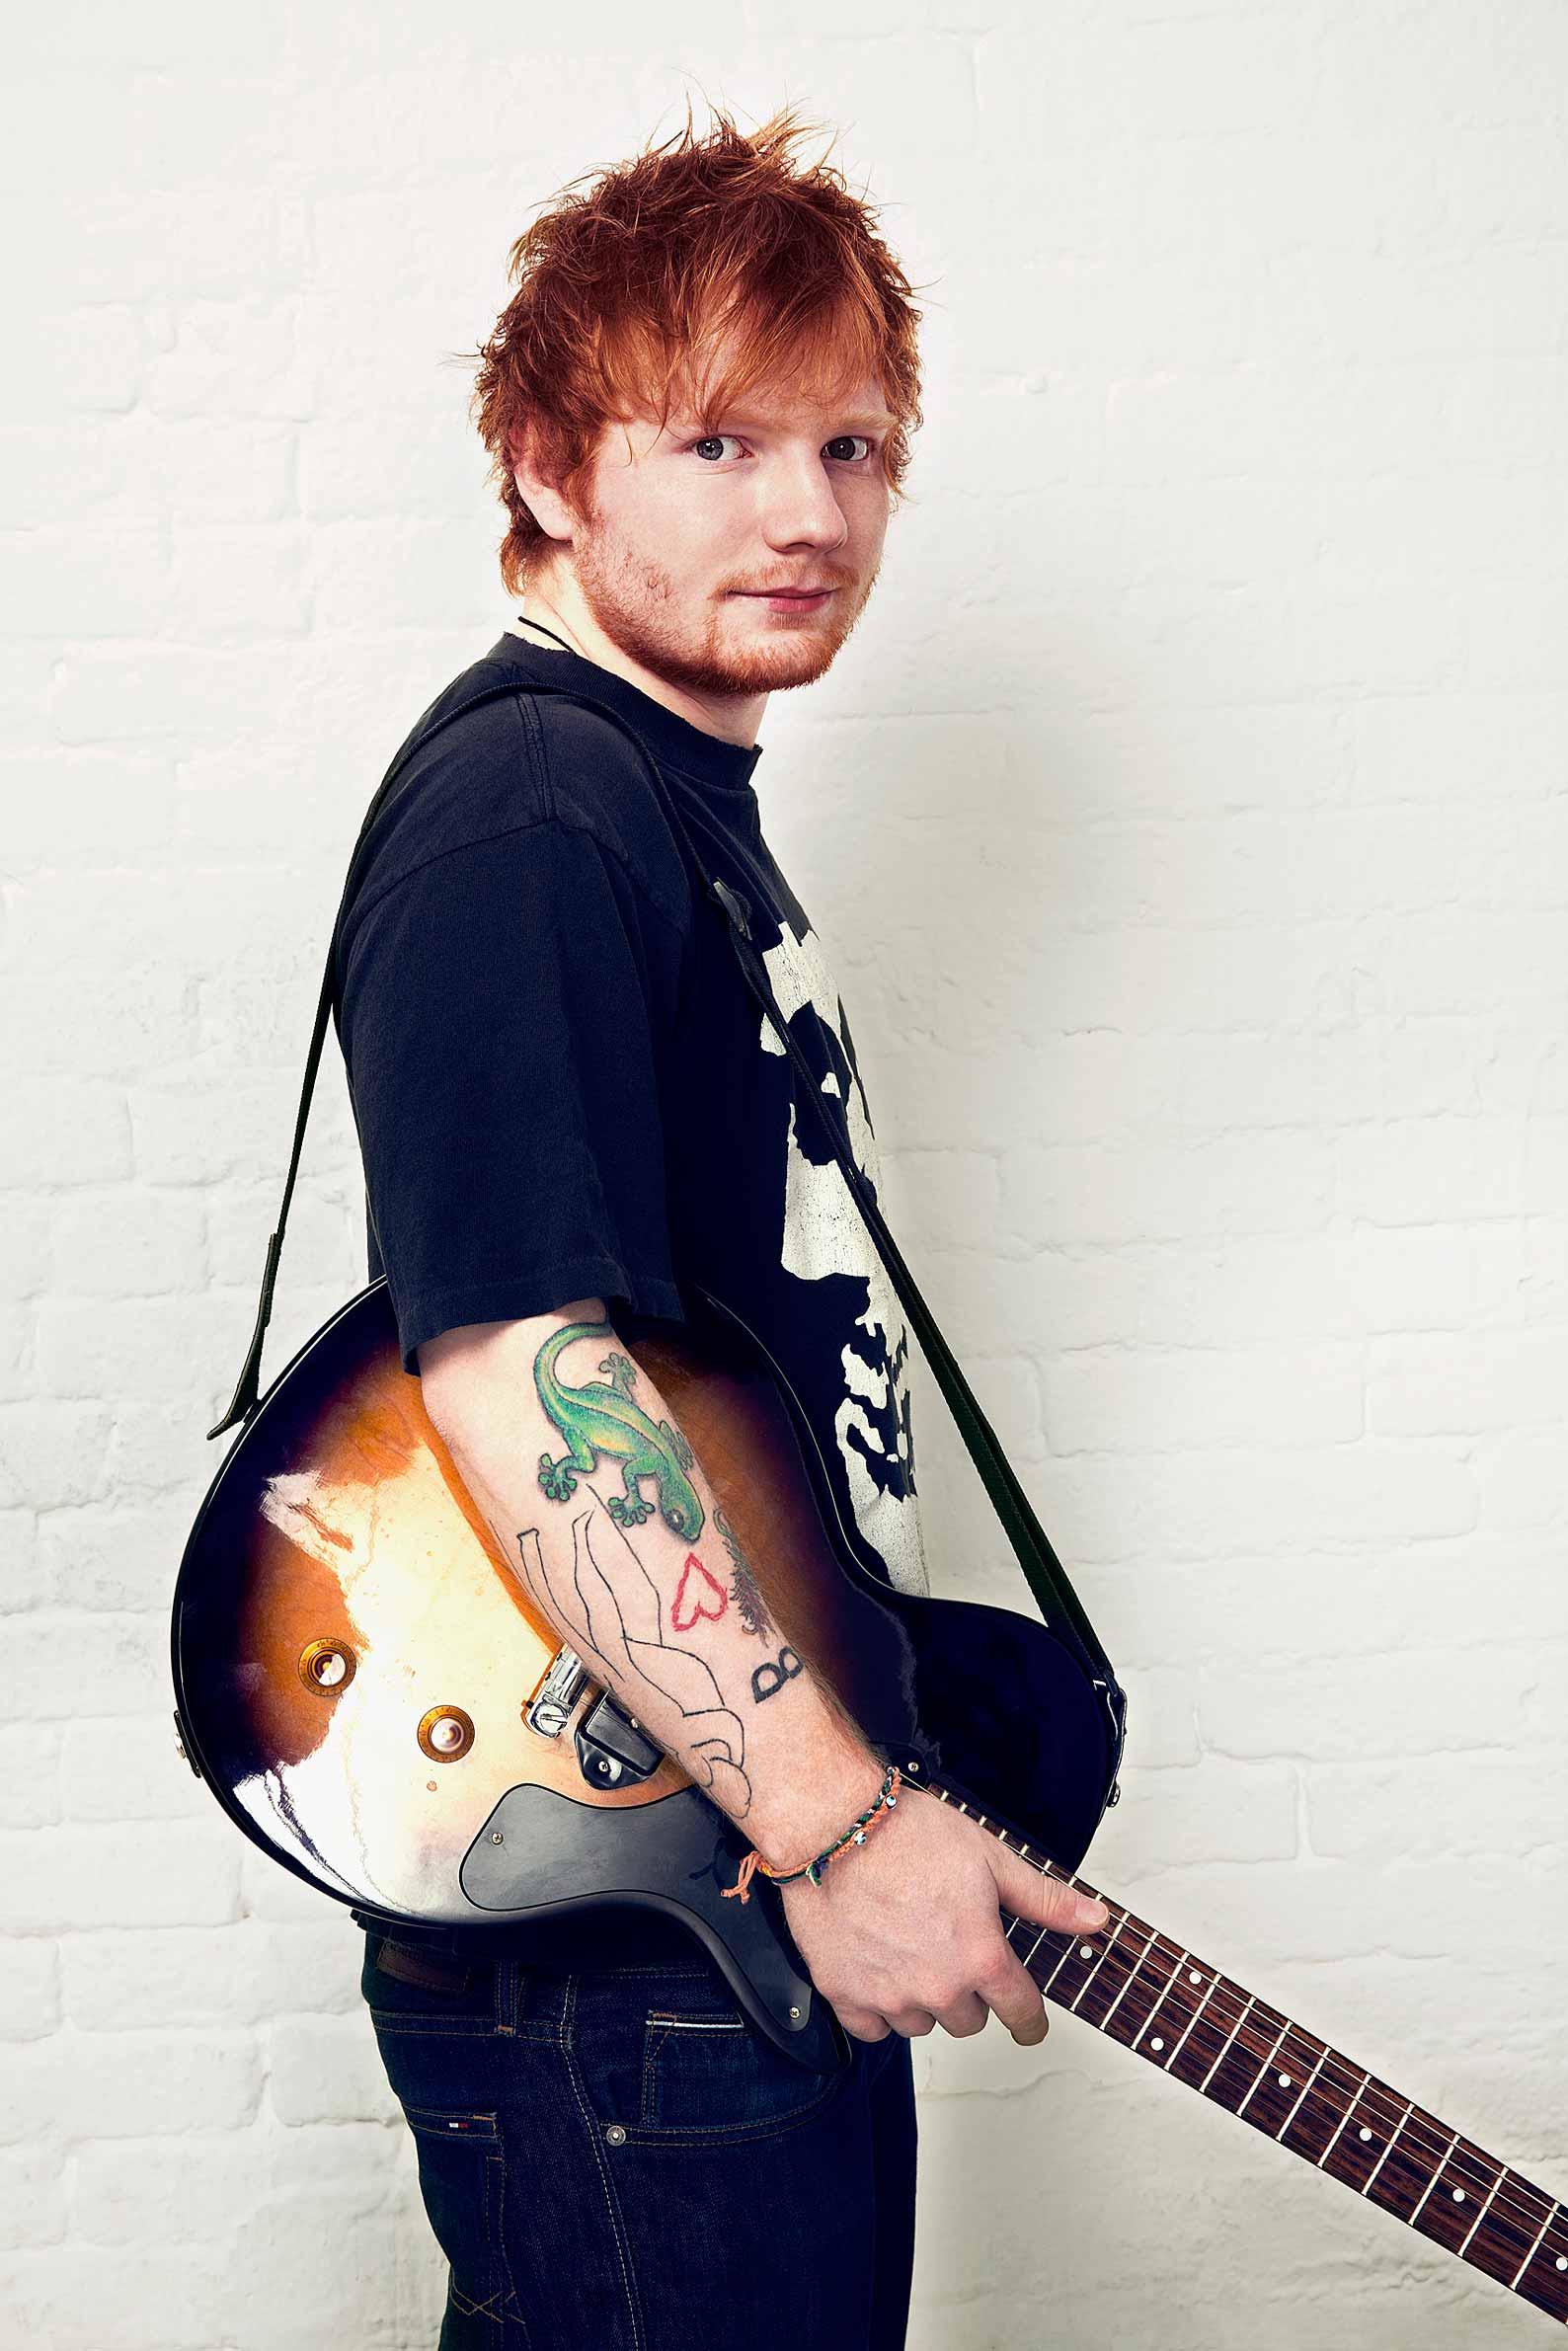 <em>Ed Sheeran, who has collaborated and toured with Taylor Swift, ­commands a fervent army of devoted young followers</em> (Jeff Riedel—Contour by Getty Images)